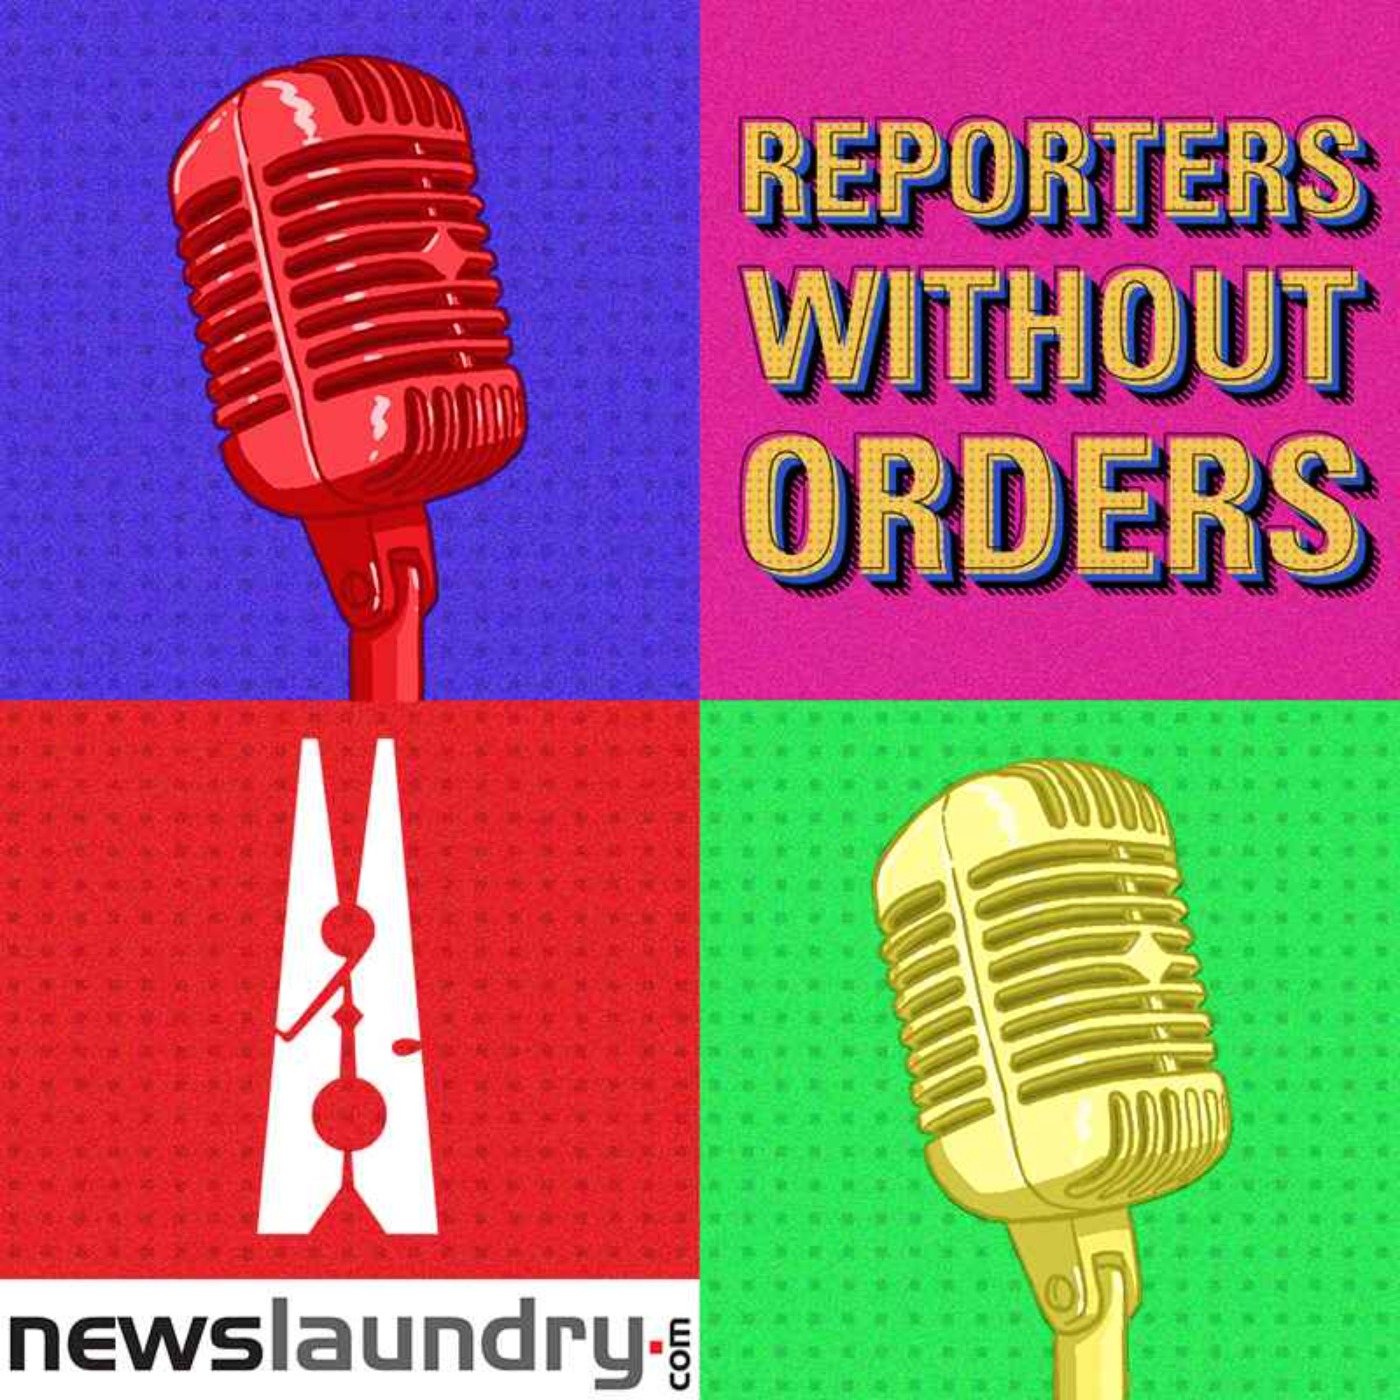 Reporters Without Orders Ep 317: ANI’s business model, Dalit farmers’ electoral bonds ‘scam’